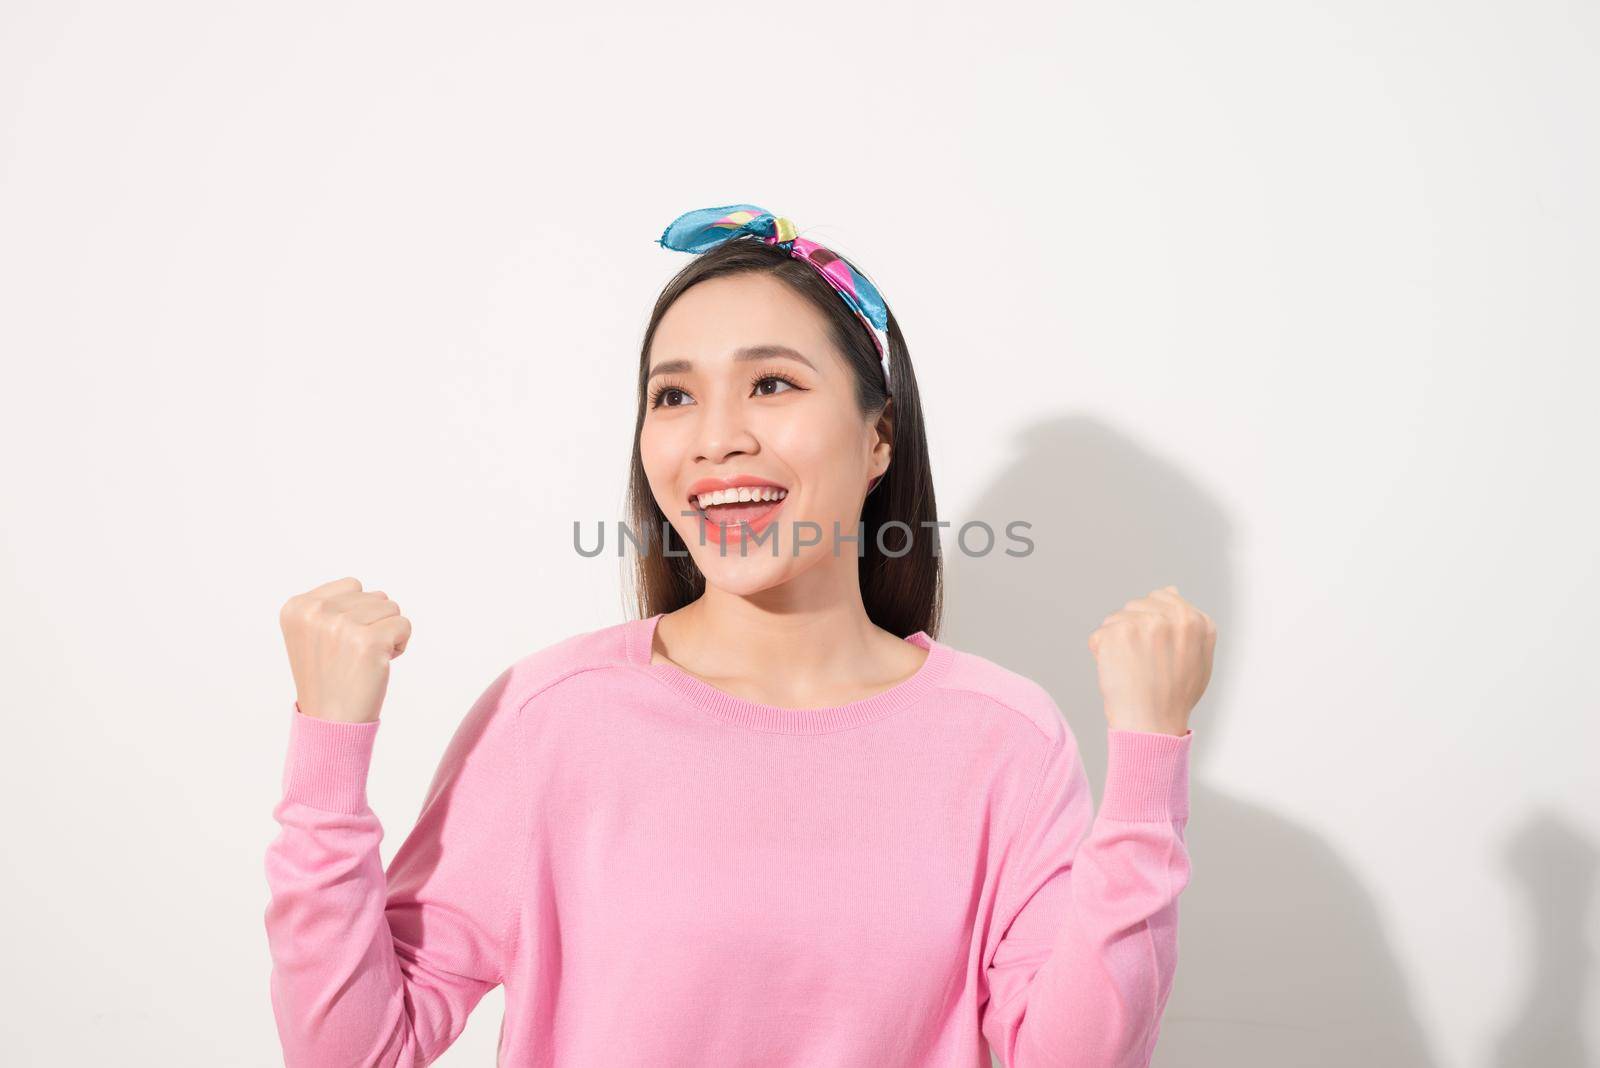 Surprised woman with hands up amazed or shocked by unexpected news holding close palms up and showing happy expression. Young adult woman on white background by makidotvn